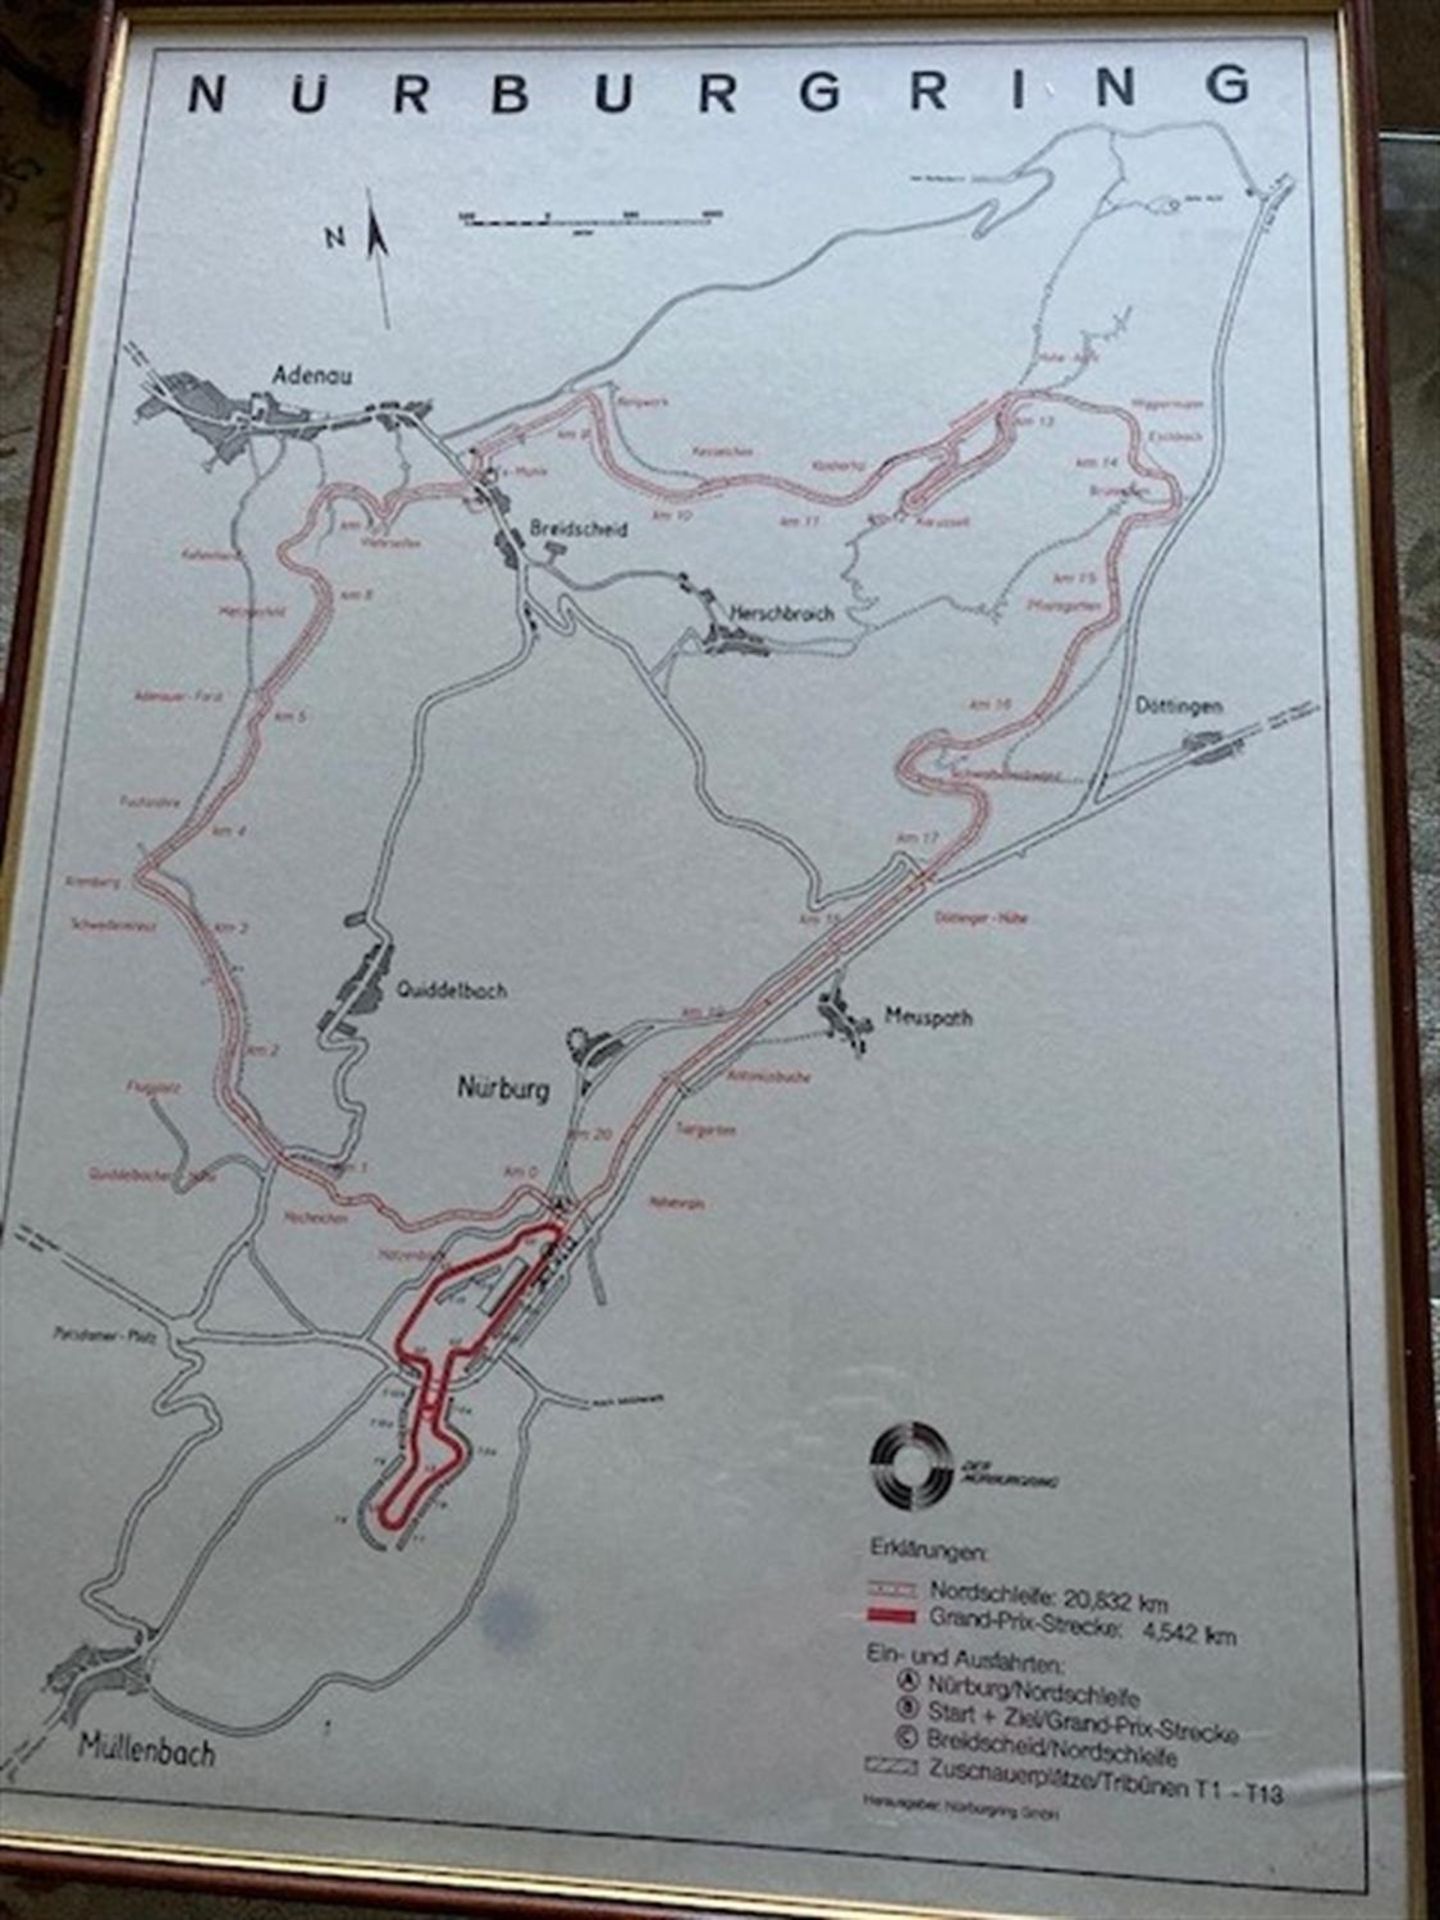 Historic Map of the Nurburgring-Nordschleife Circuit